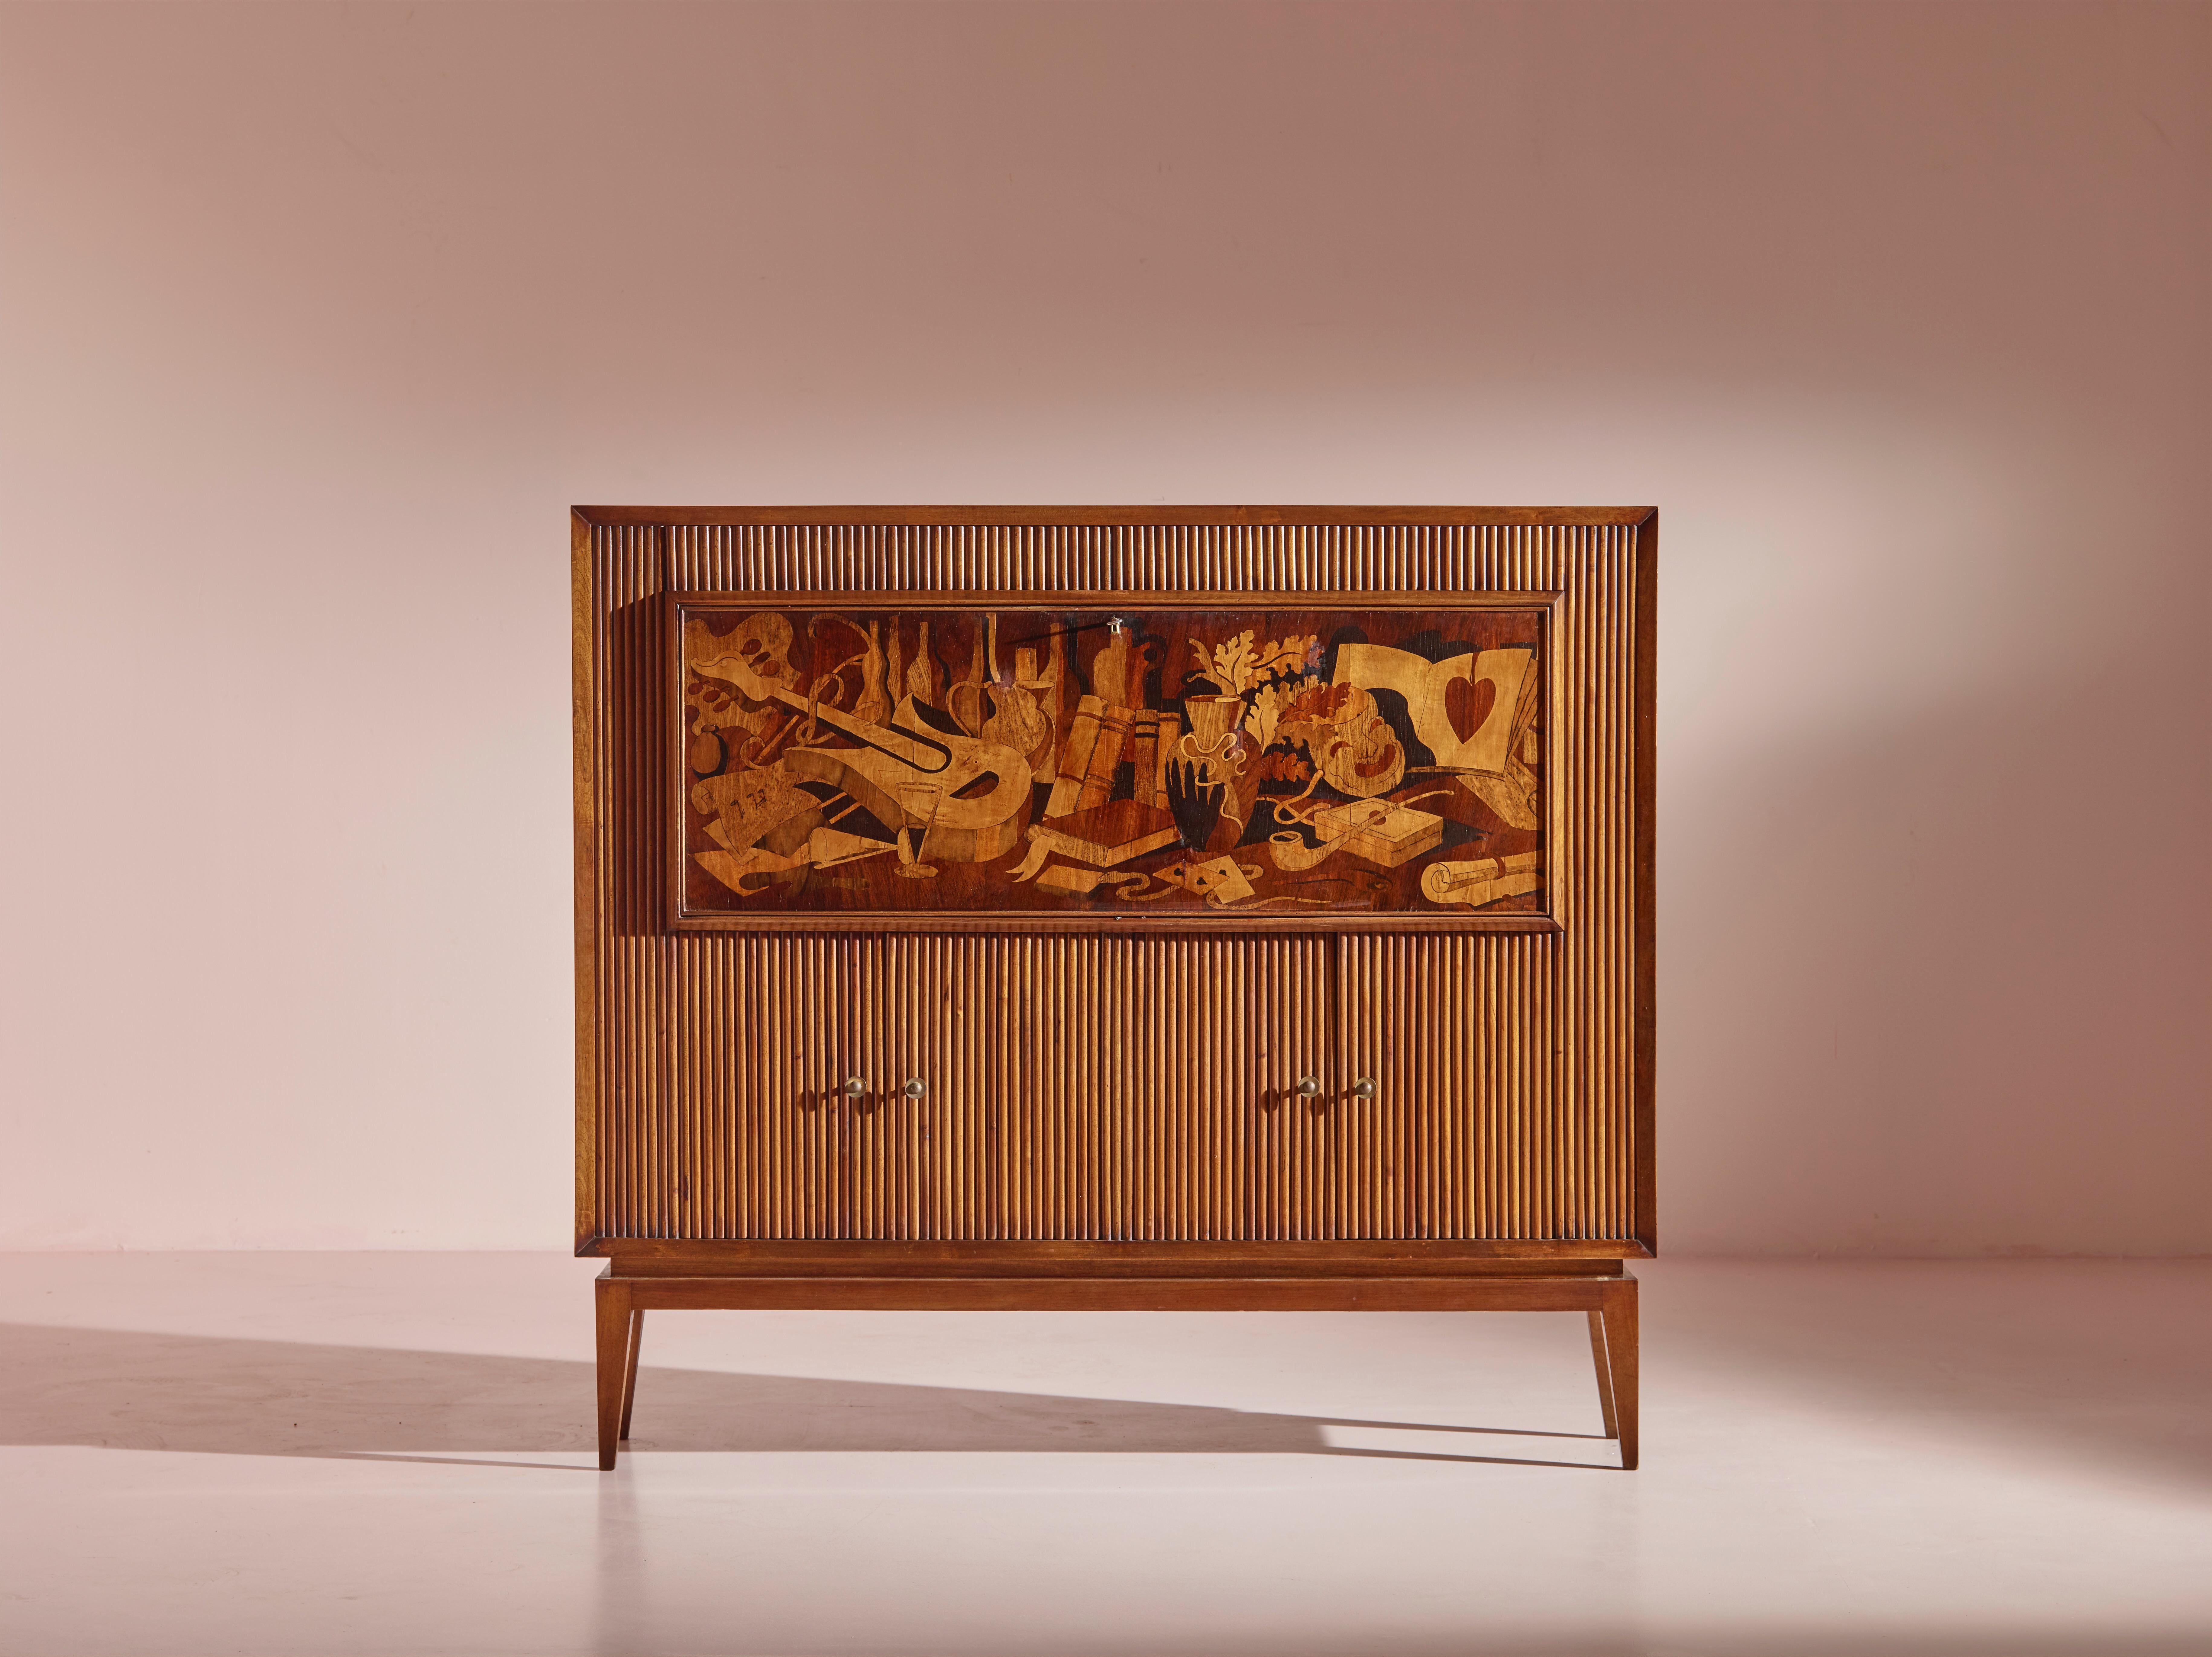 An exceptional inlaid bar cabinet with grissinato details, designed and crafted as a unique piece by the talented Emanuele Rambaldi in Italy during the 1930s.

Crafted from rich, lustrous walnut, this bar cabinet exudes an air of sophistication and